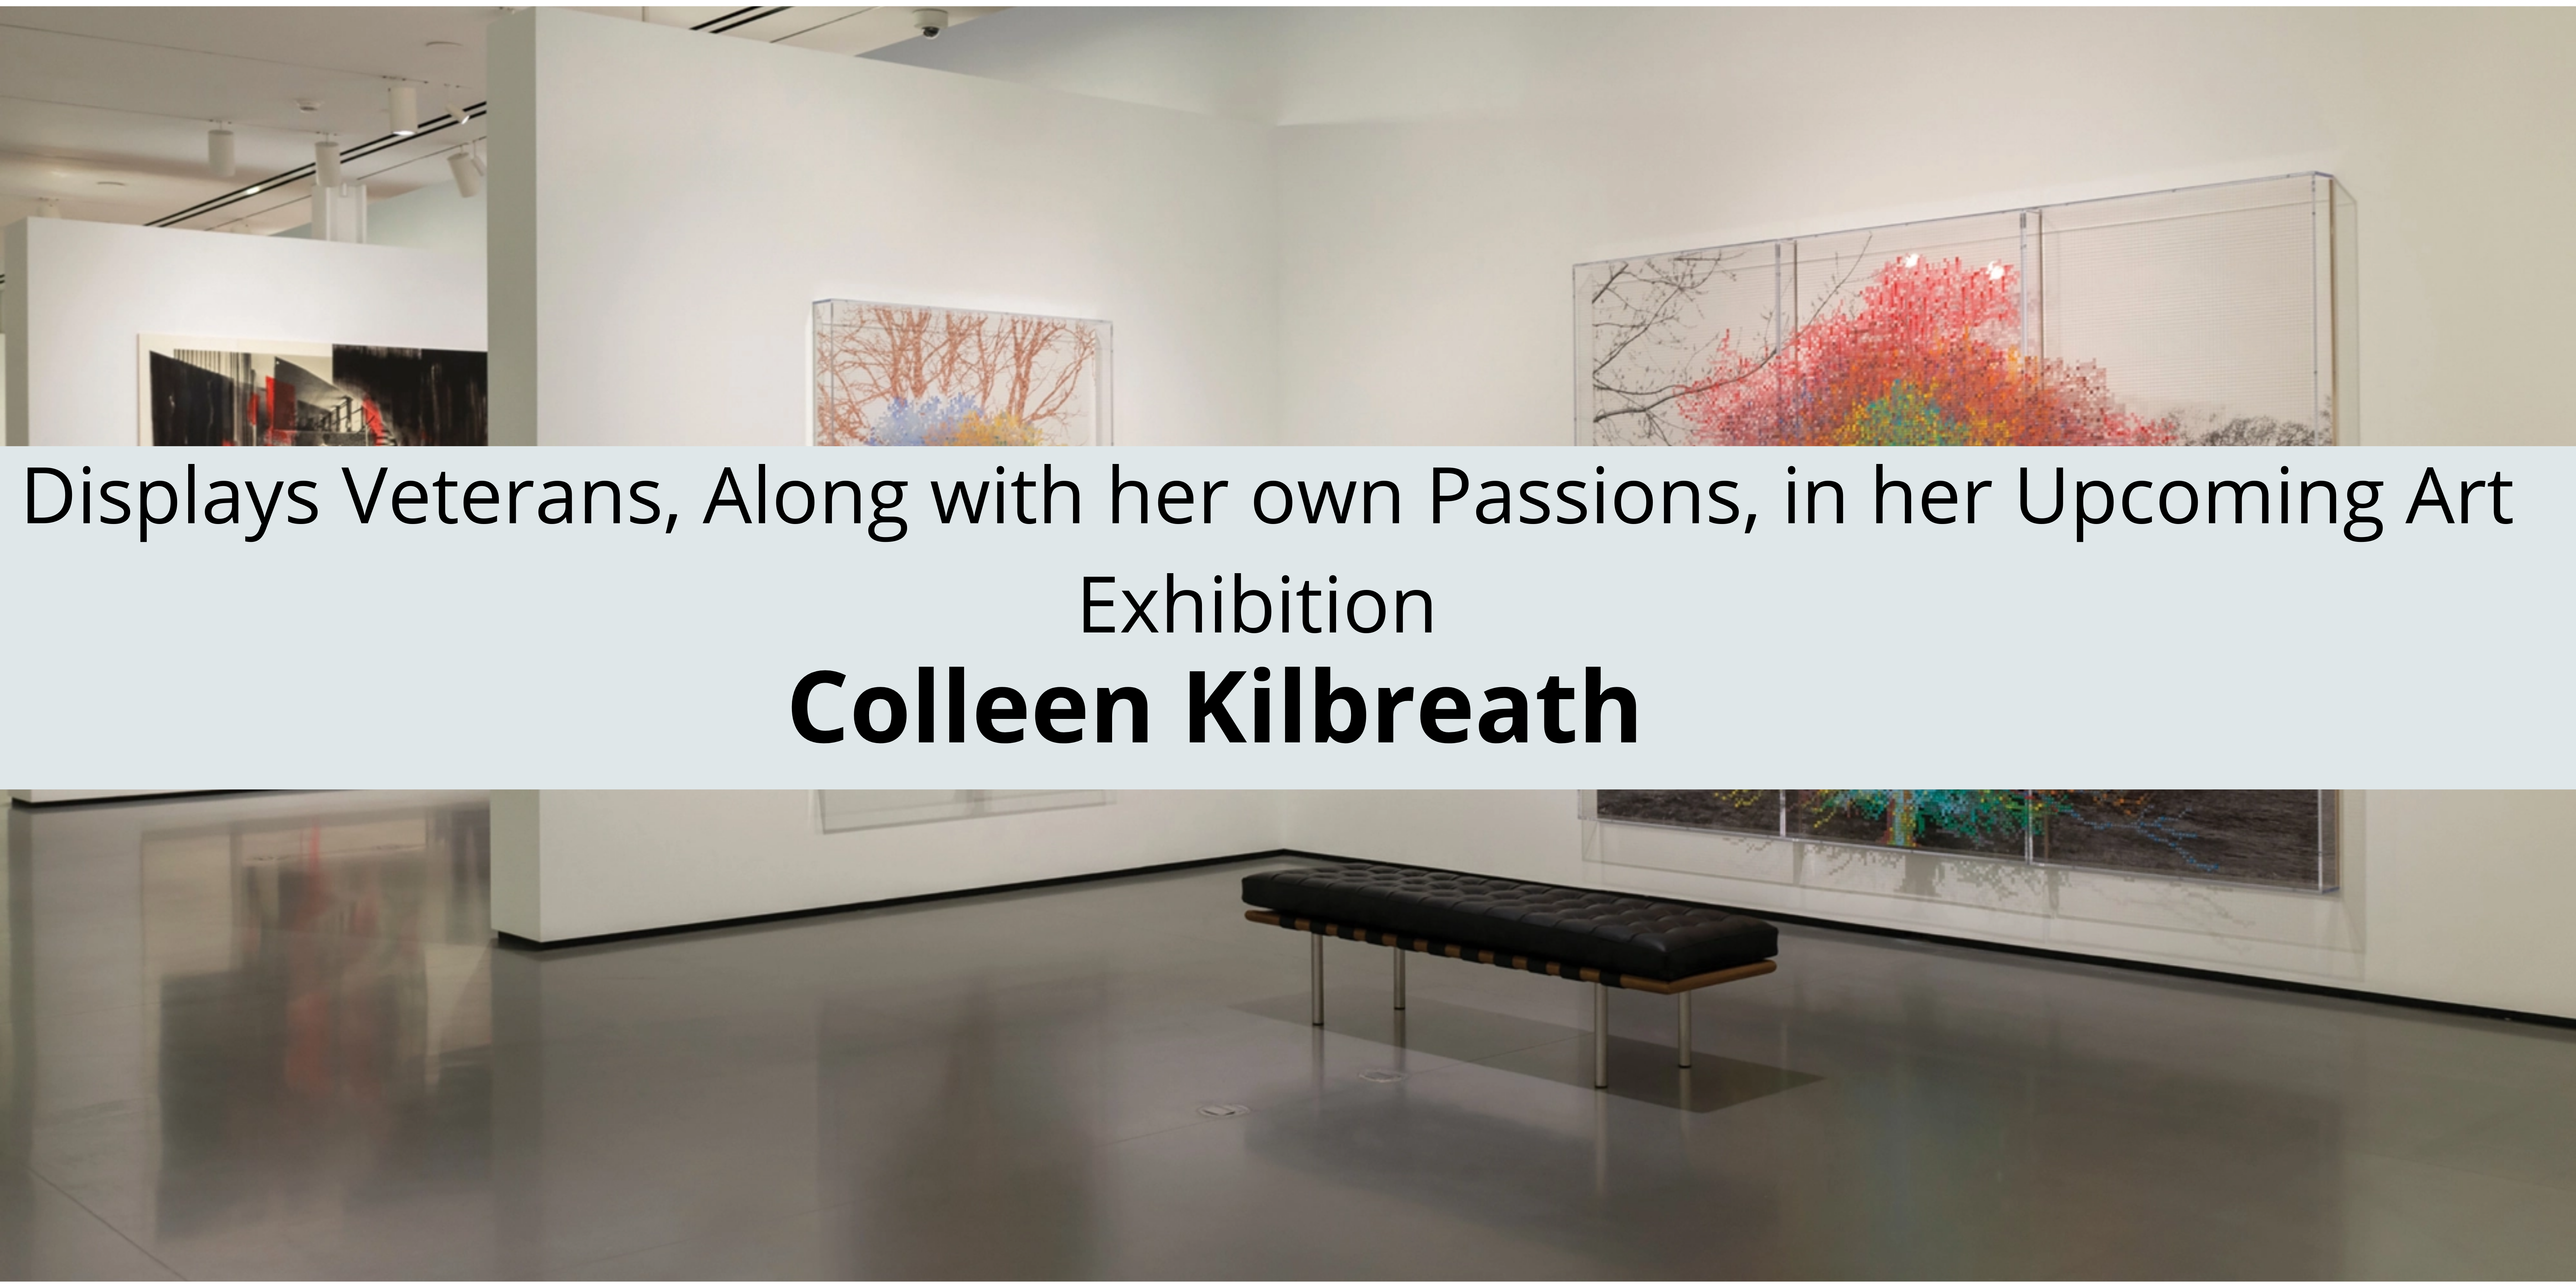 Colleen Kilbreath Displays Veterans, Along with her own Passions, in her Upcoming Art Exhibition